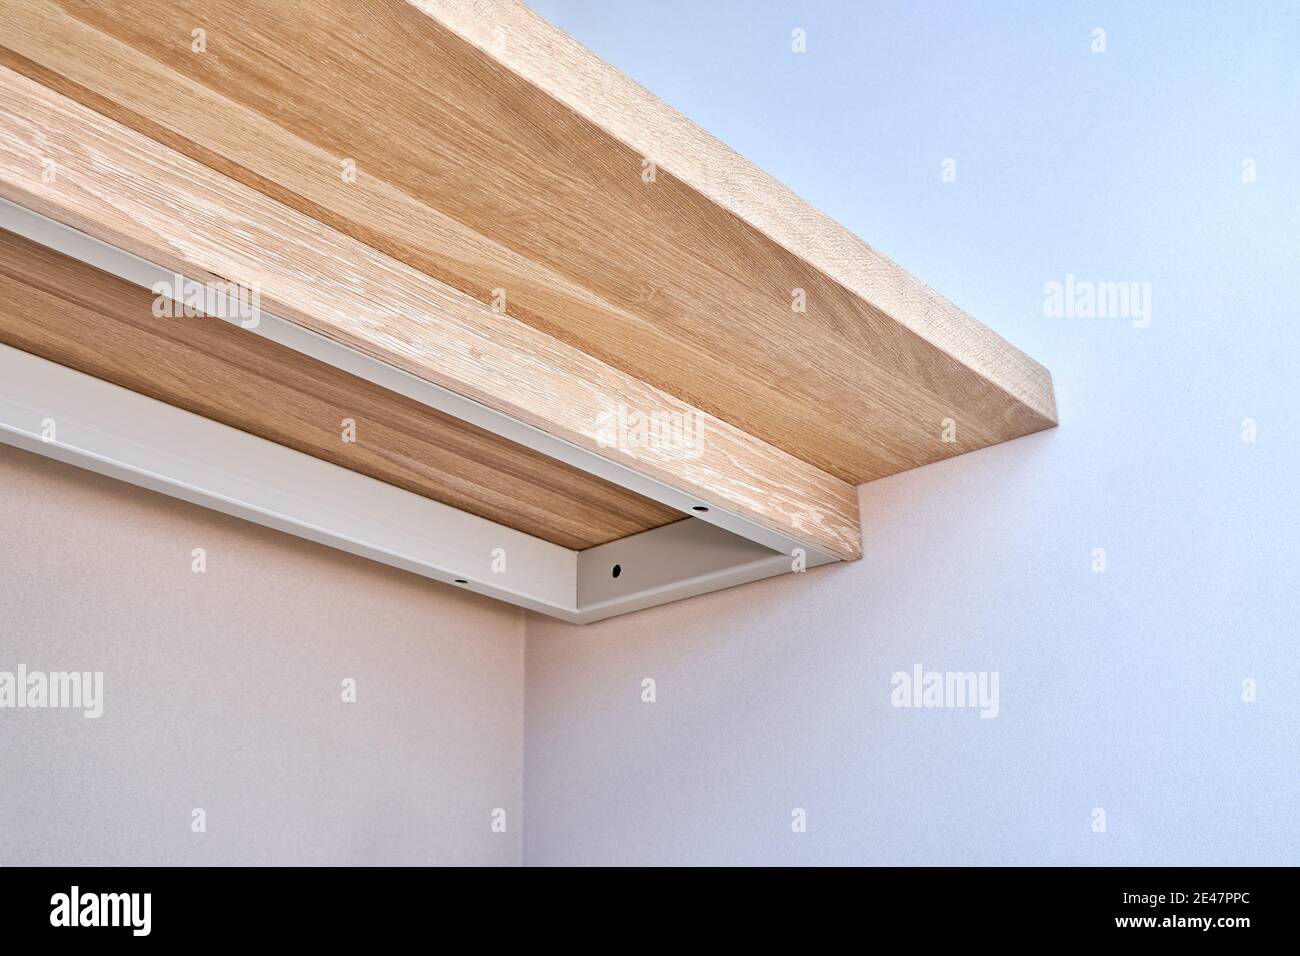 Elegant writing desk made with bleached solid oak timber mounted on white wall, bottom view Stock Photo